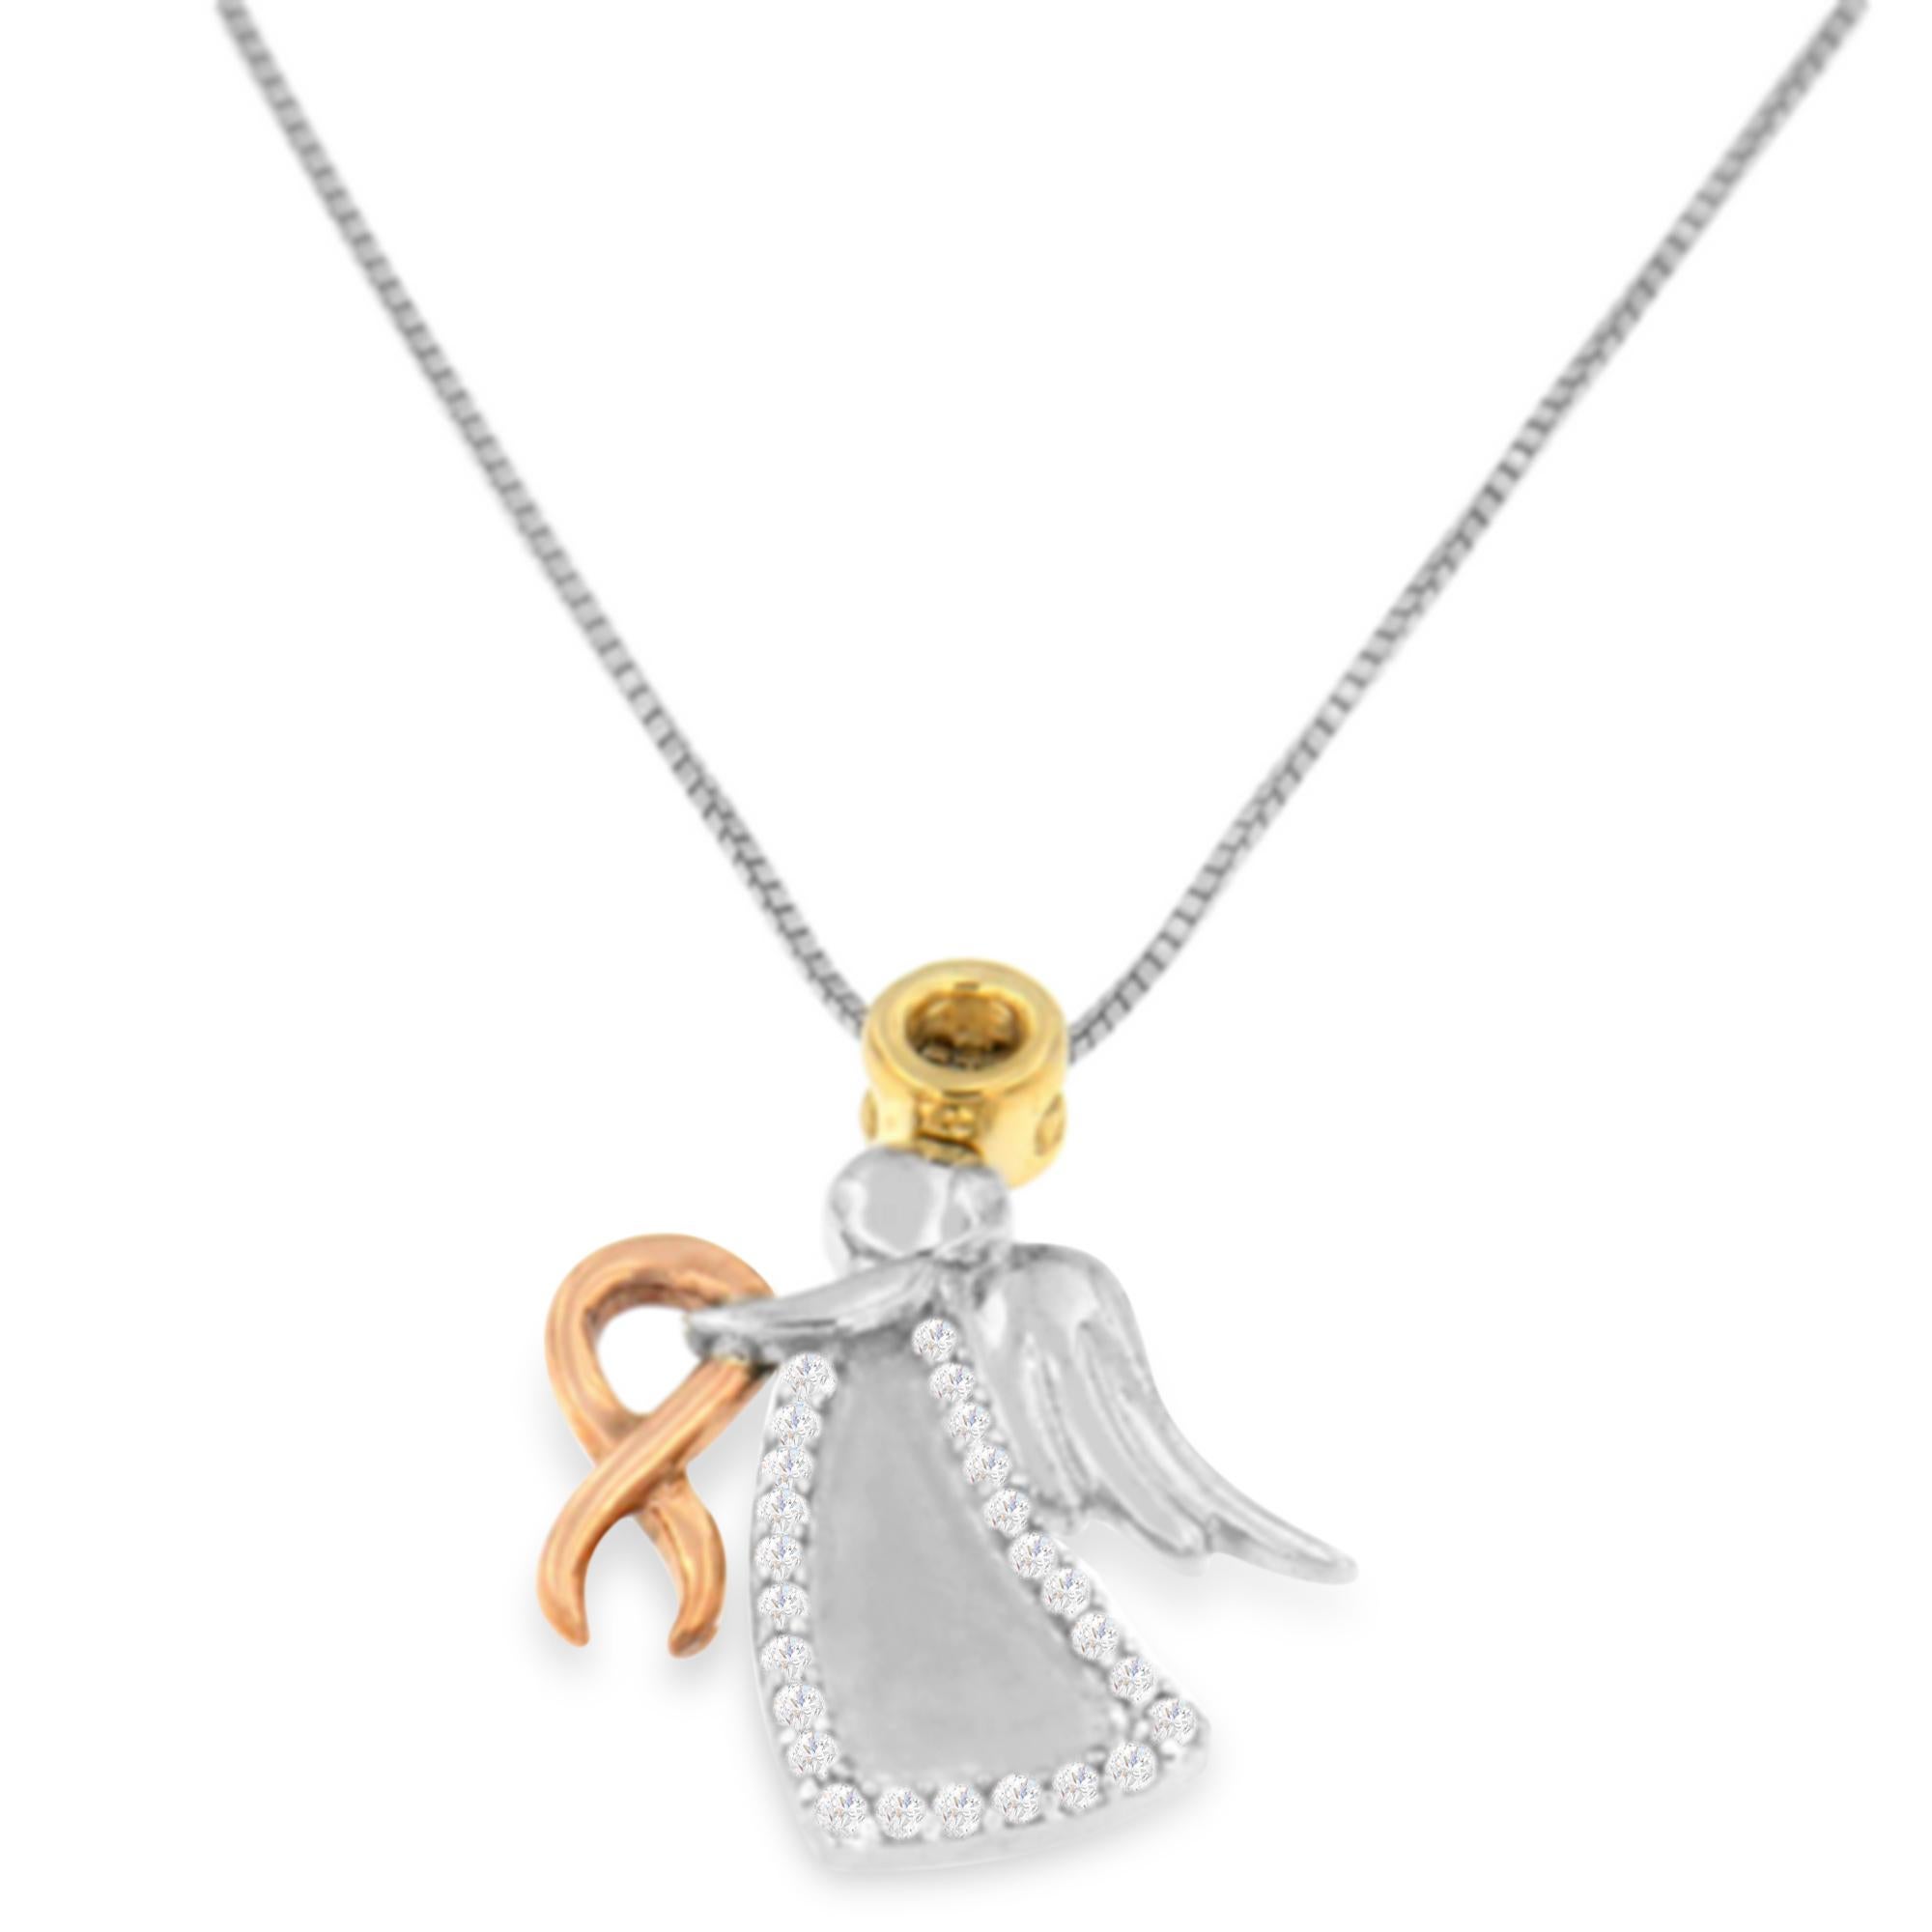 This charming pendant showcases that angels do exist. Gently clasping 10 karats rose gold ribbon in her hands, the beautiful angel is depicted in the two tone gold and white silver mix in the form of a pendant. It is elegantly adorned with